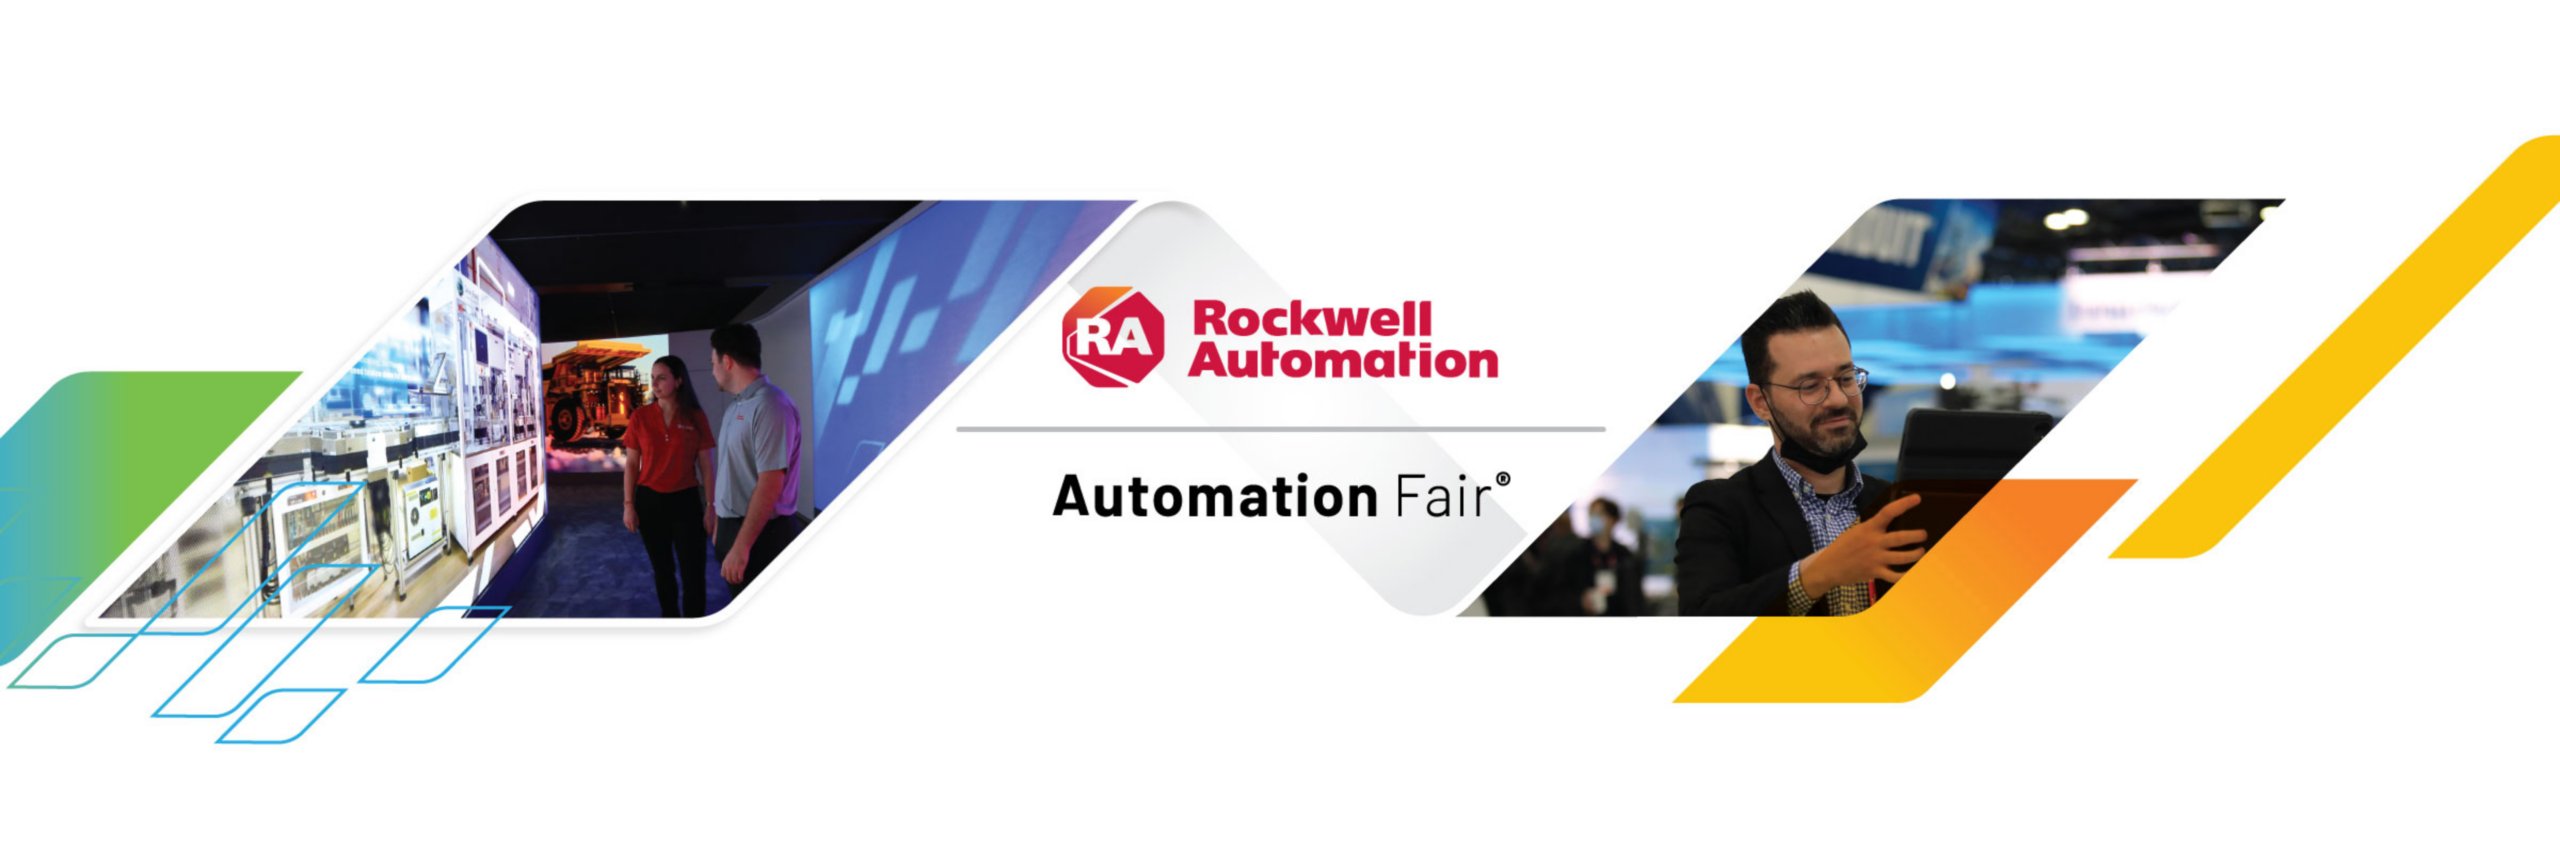 Rockwell Automation – Automation Fair logo with an image of a male and female walking through an exhibit with image of technology on surrounding screens and an image of a male using a tablet on an event show floor. 